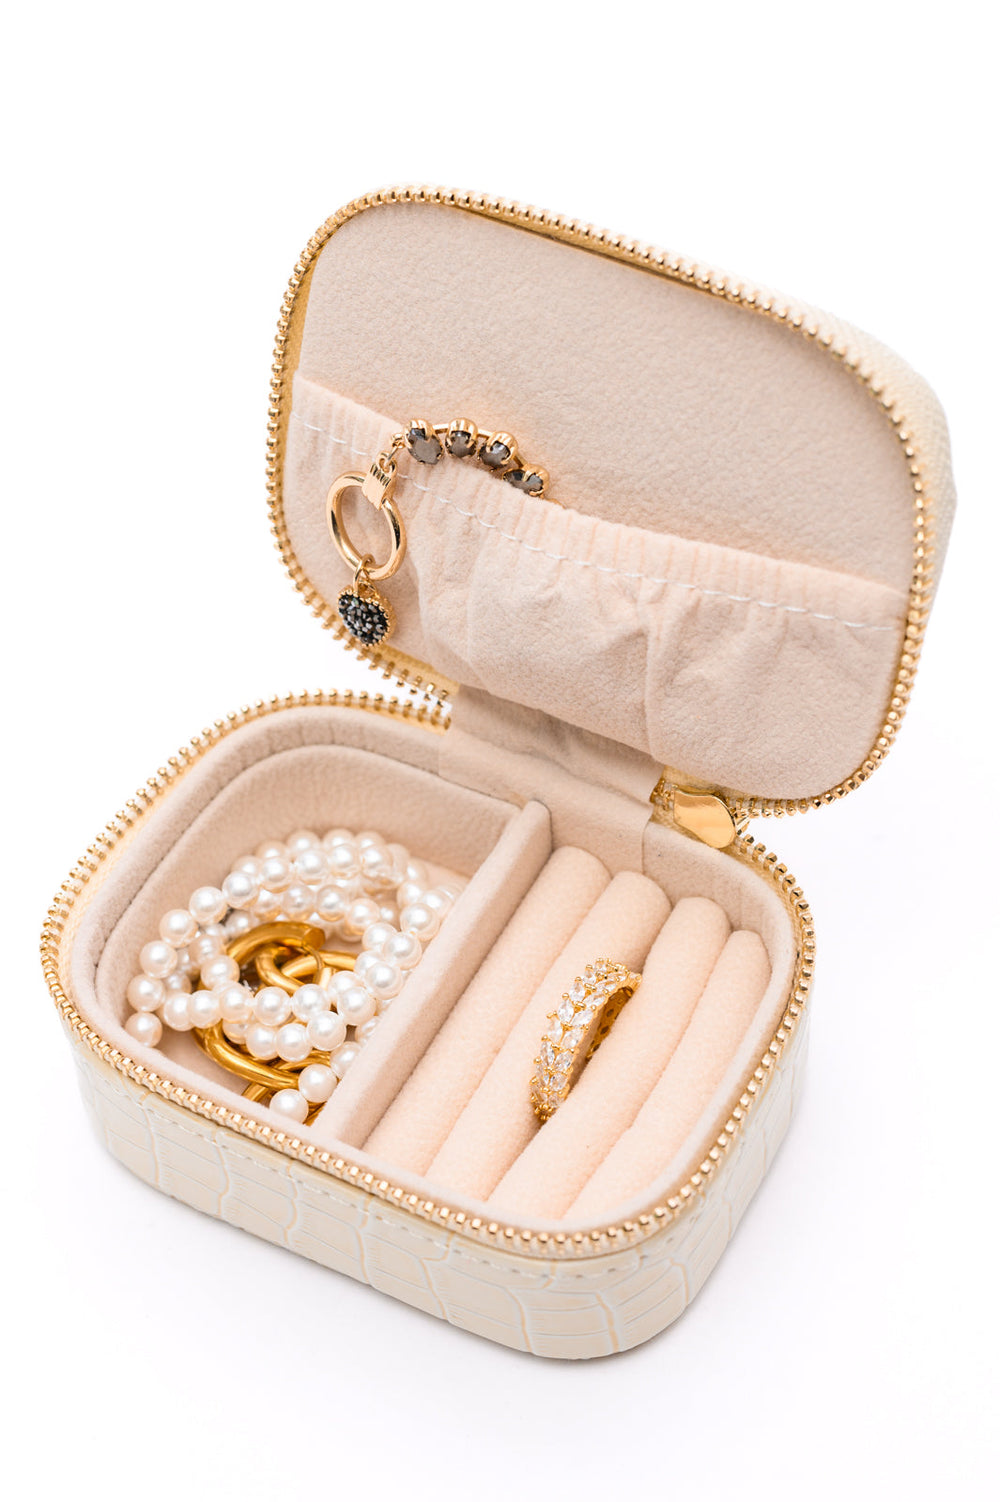 Travel Jewelry Case in Cream Snakeskin-220 Beauty/Gift-Inspired by Justeen-Women's Clothing Boutique in Chicago, Illinois